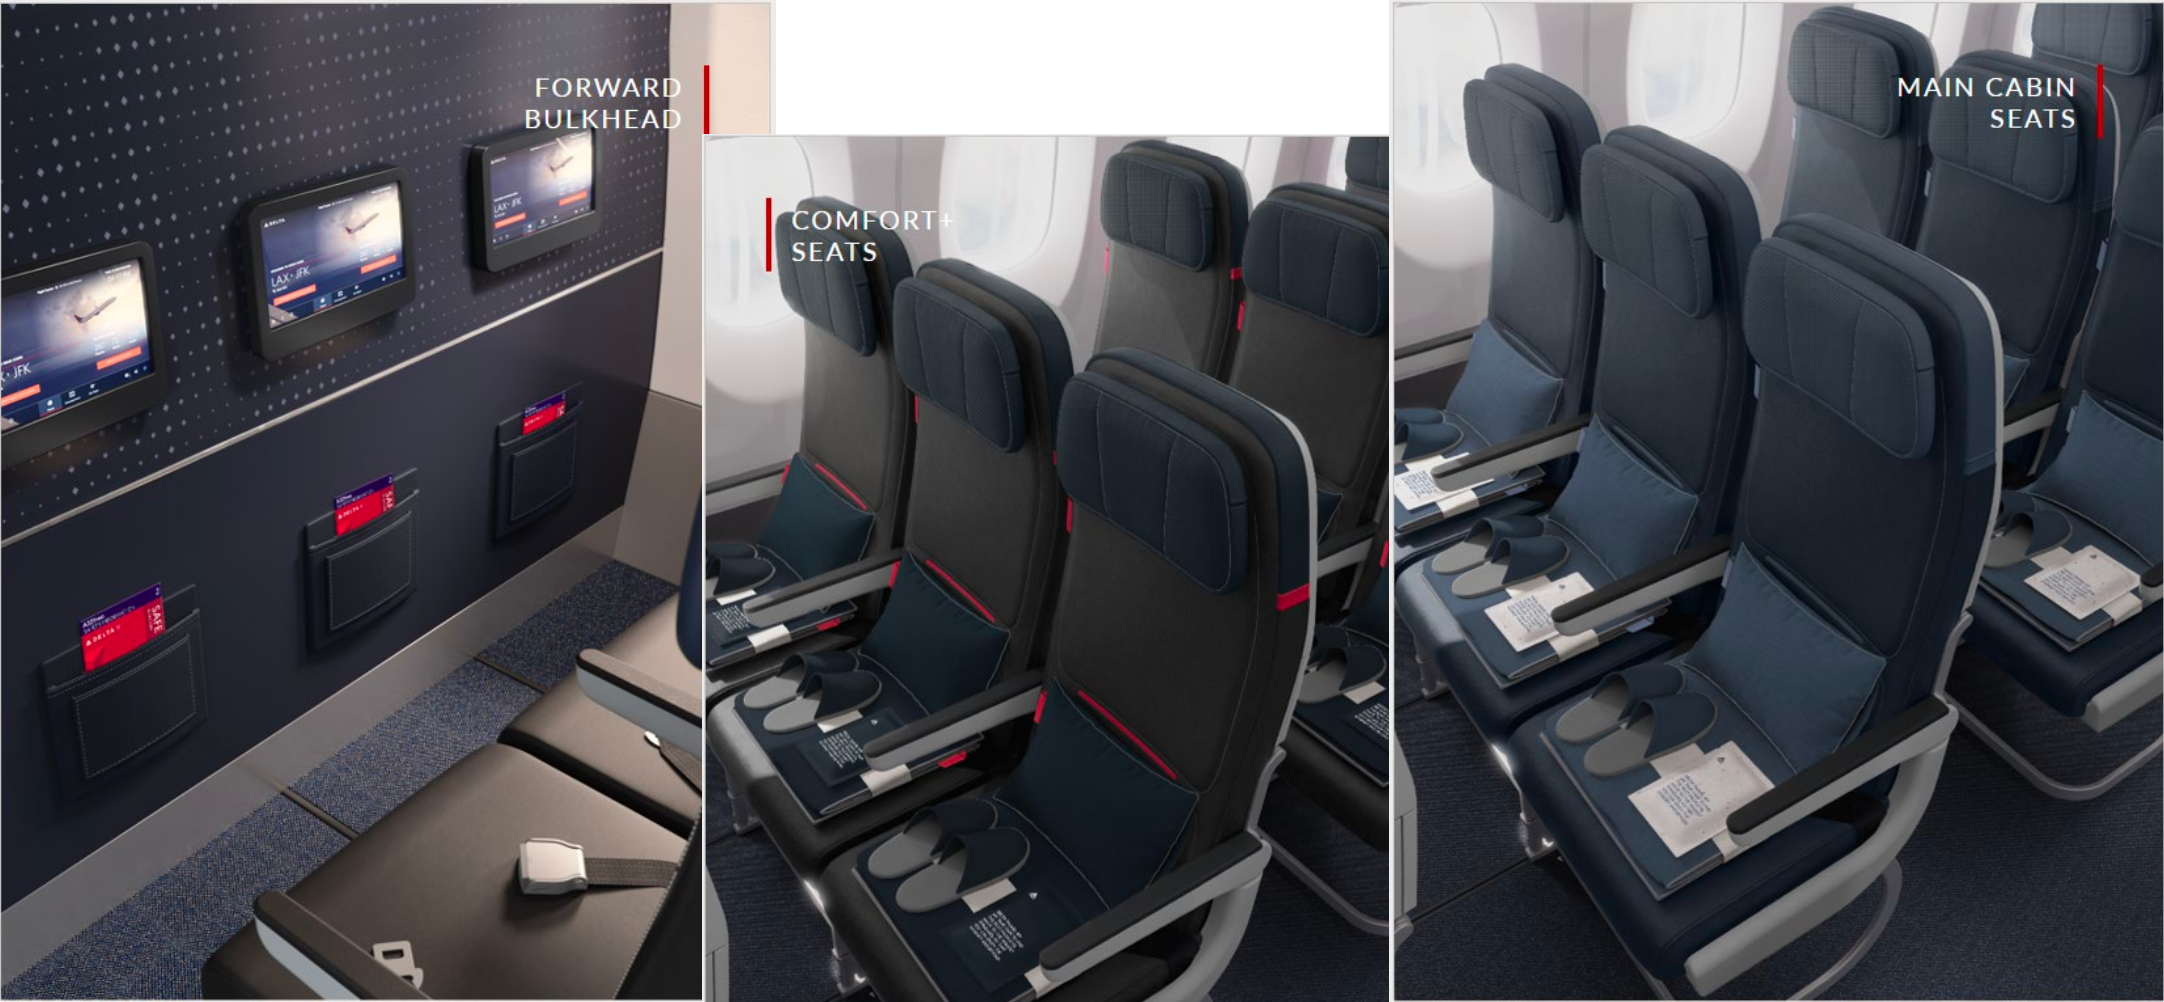 Delta leans into darker hues with potential cabin rebrand